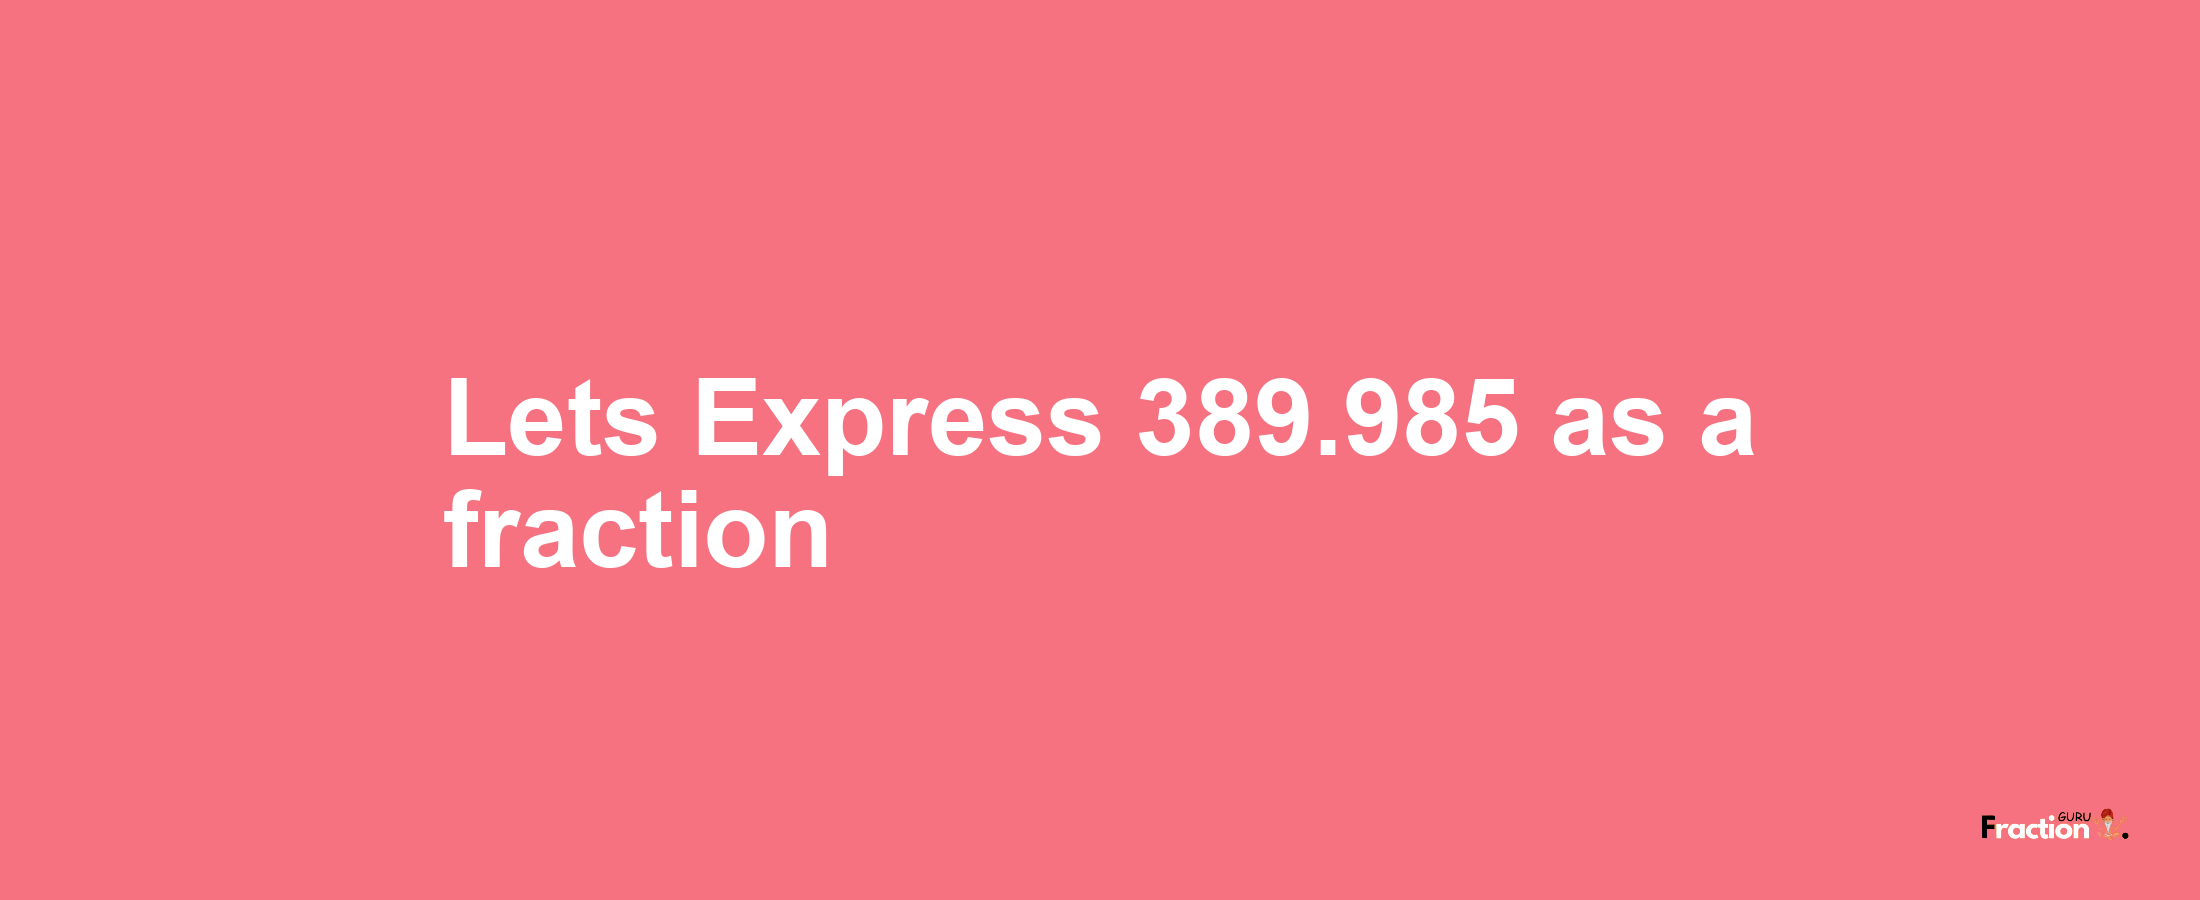 Lets Express 389.985 as afraction